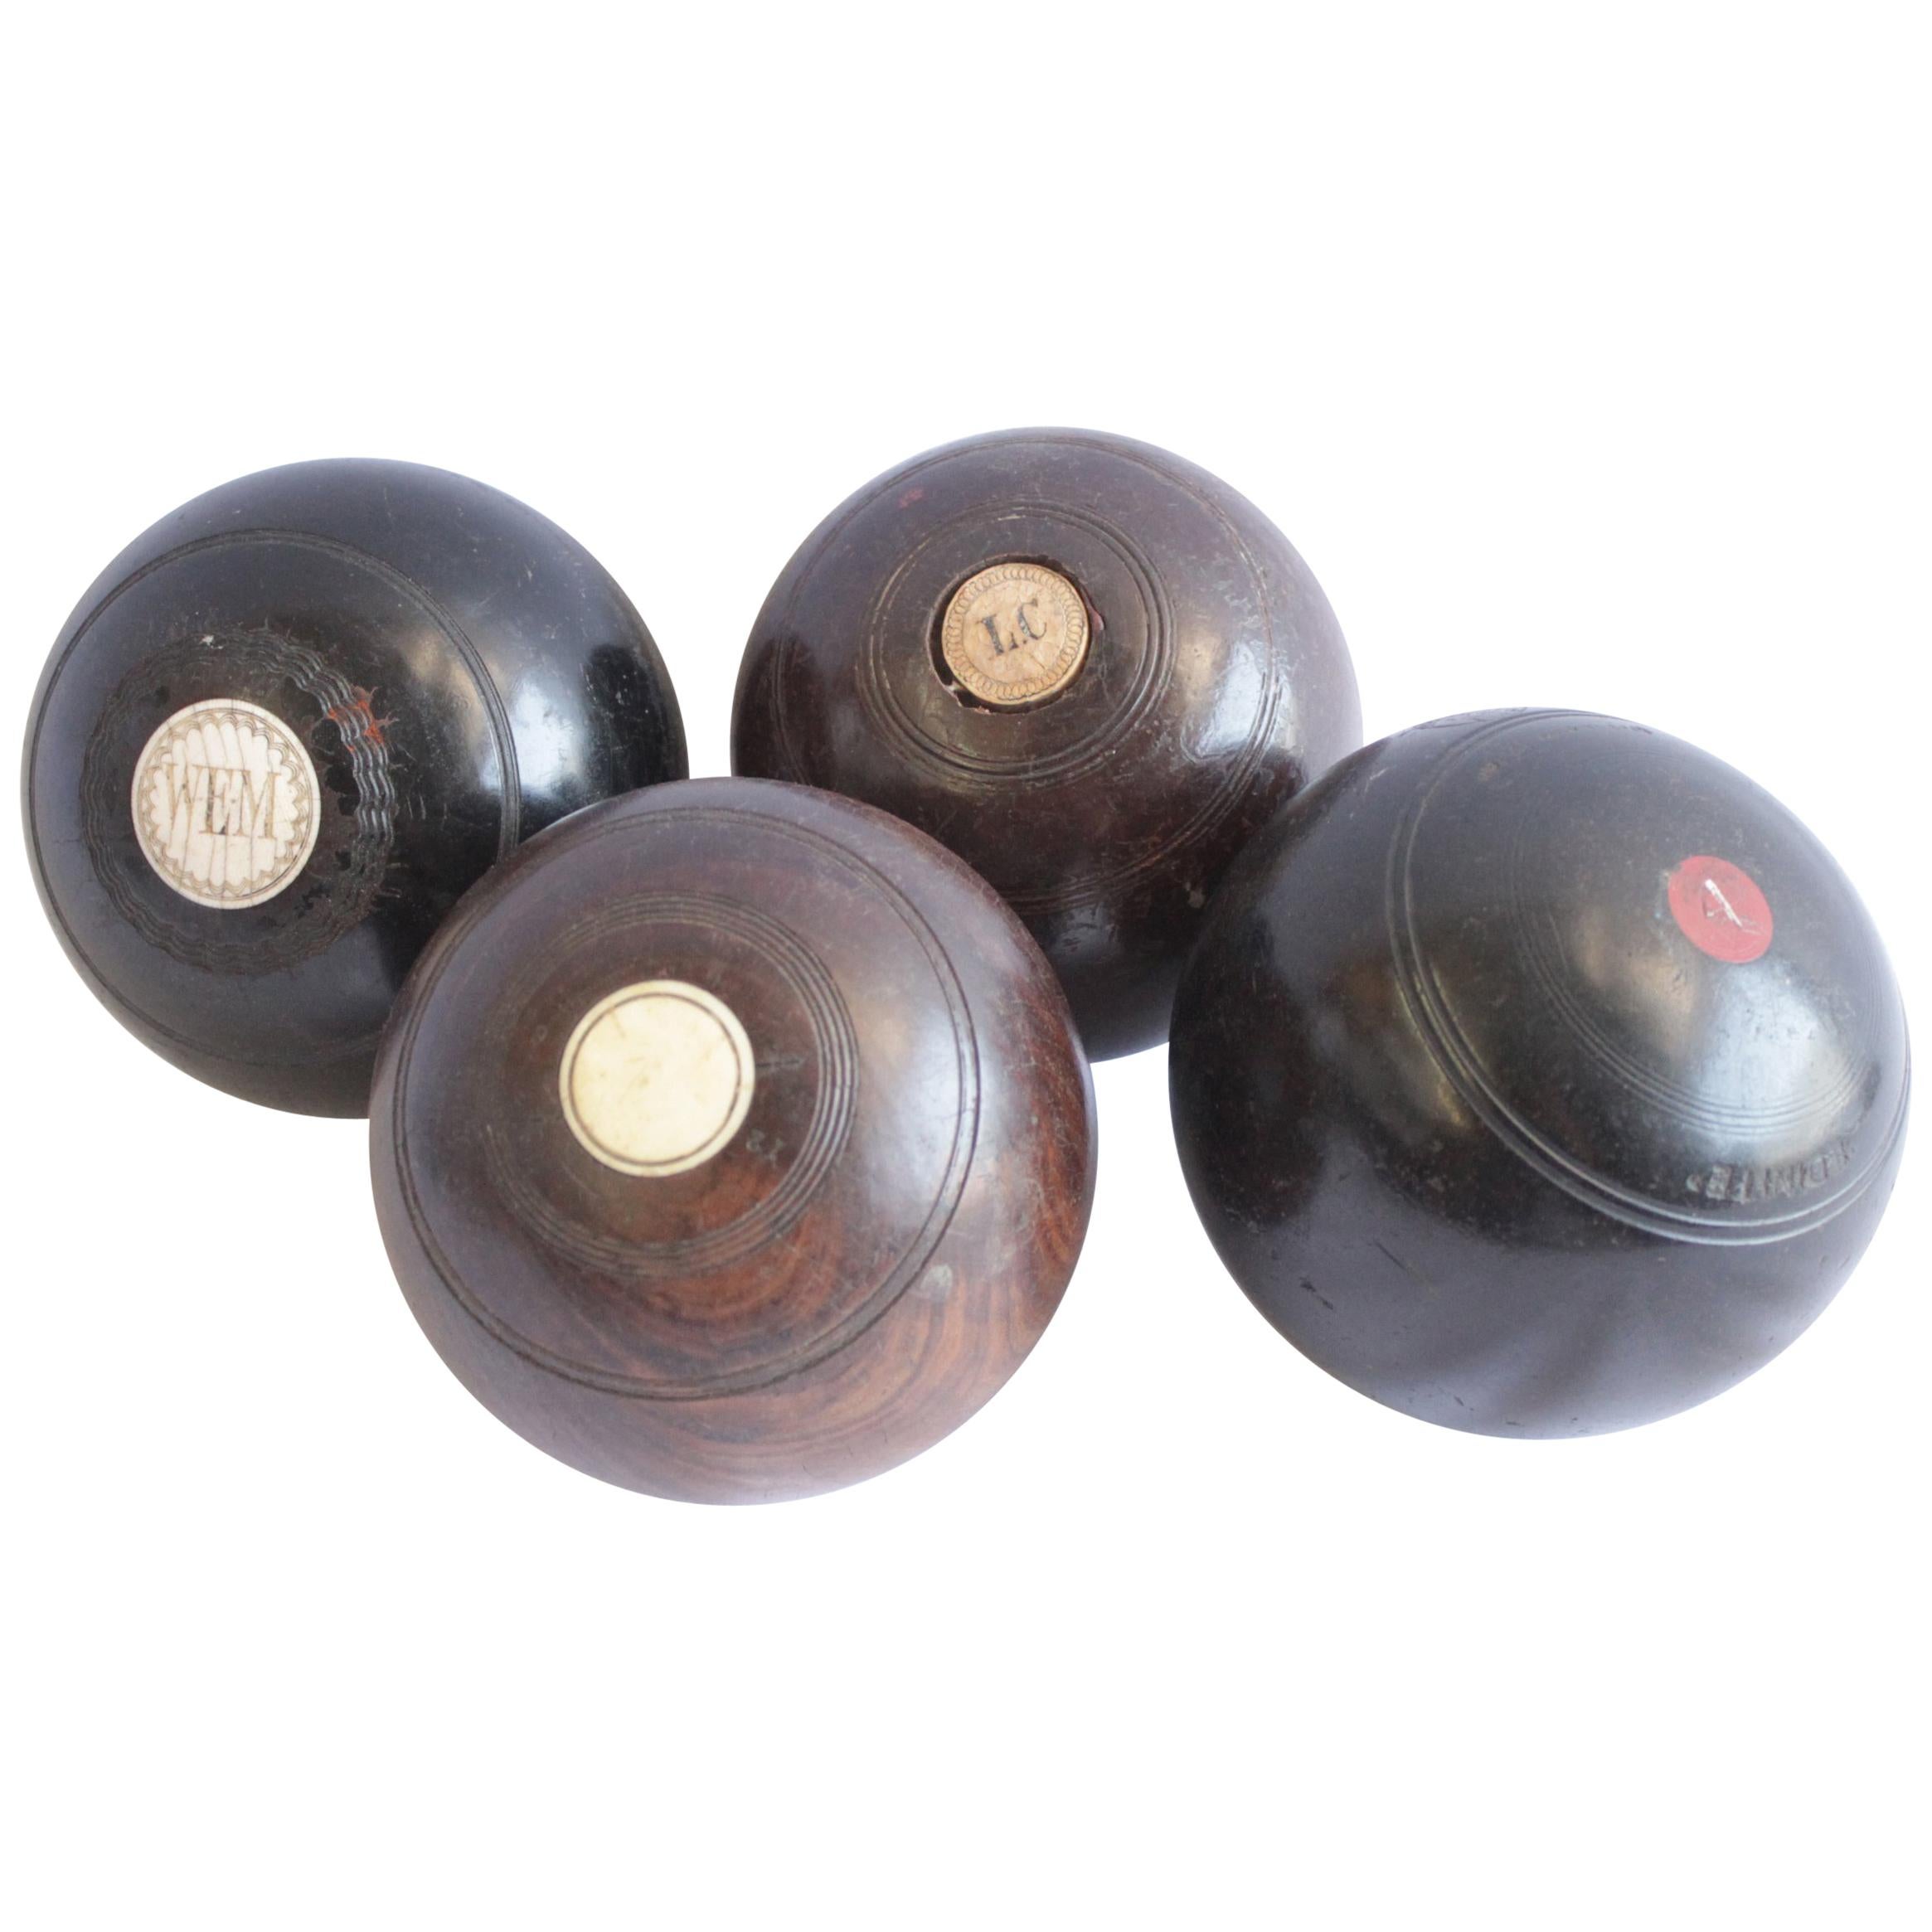 Antique Wooden Lawn Bowling Balls with Monograms